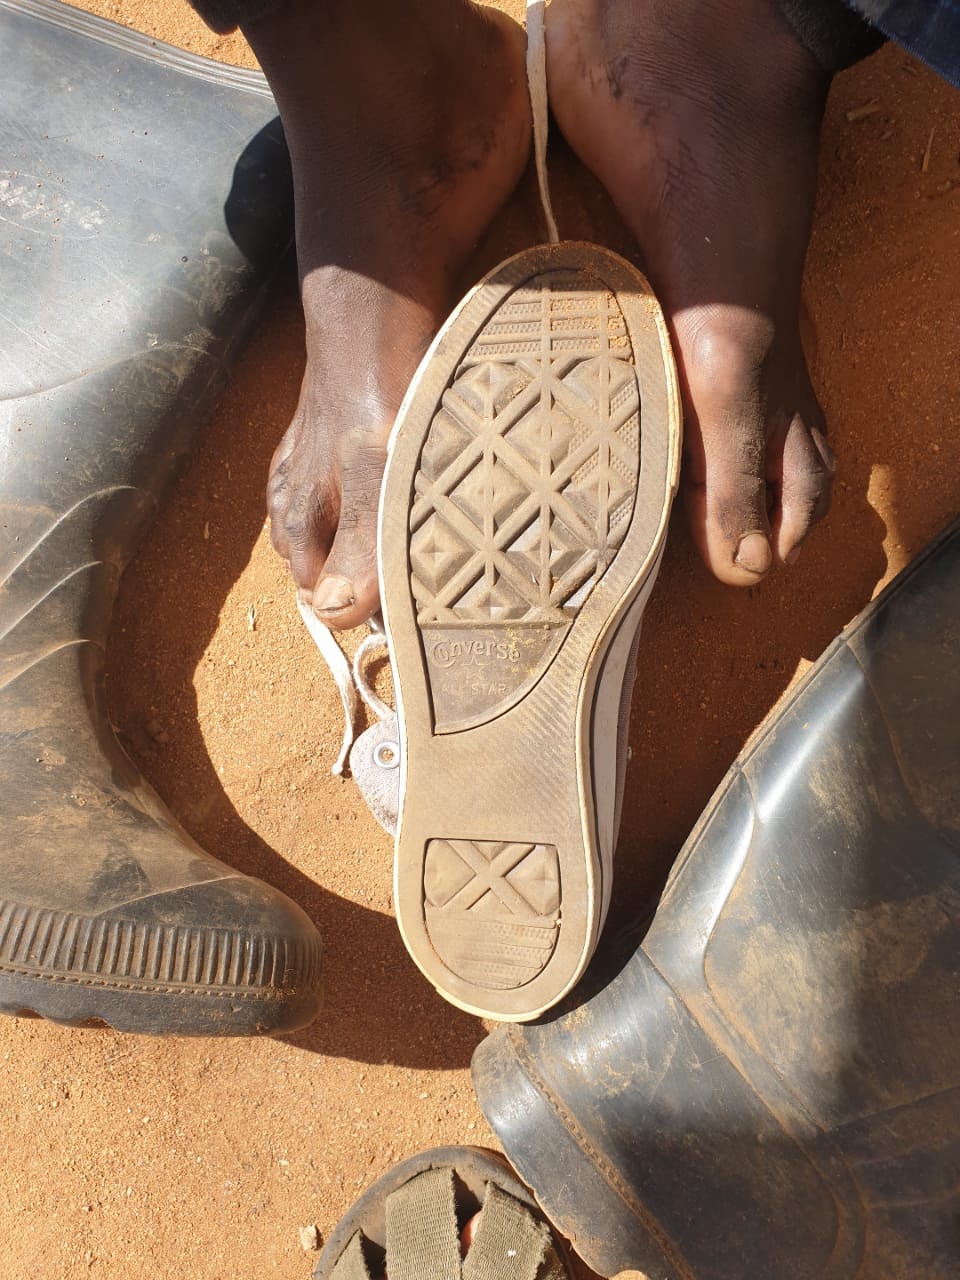 African male feet, a converse shoe and gumboots with soil in the background.